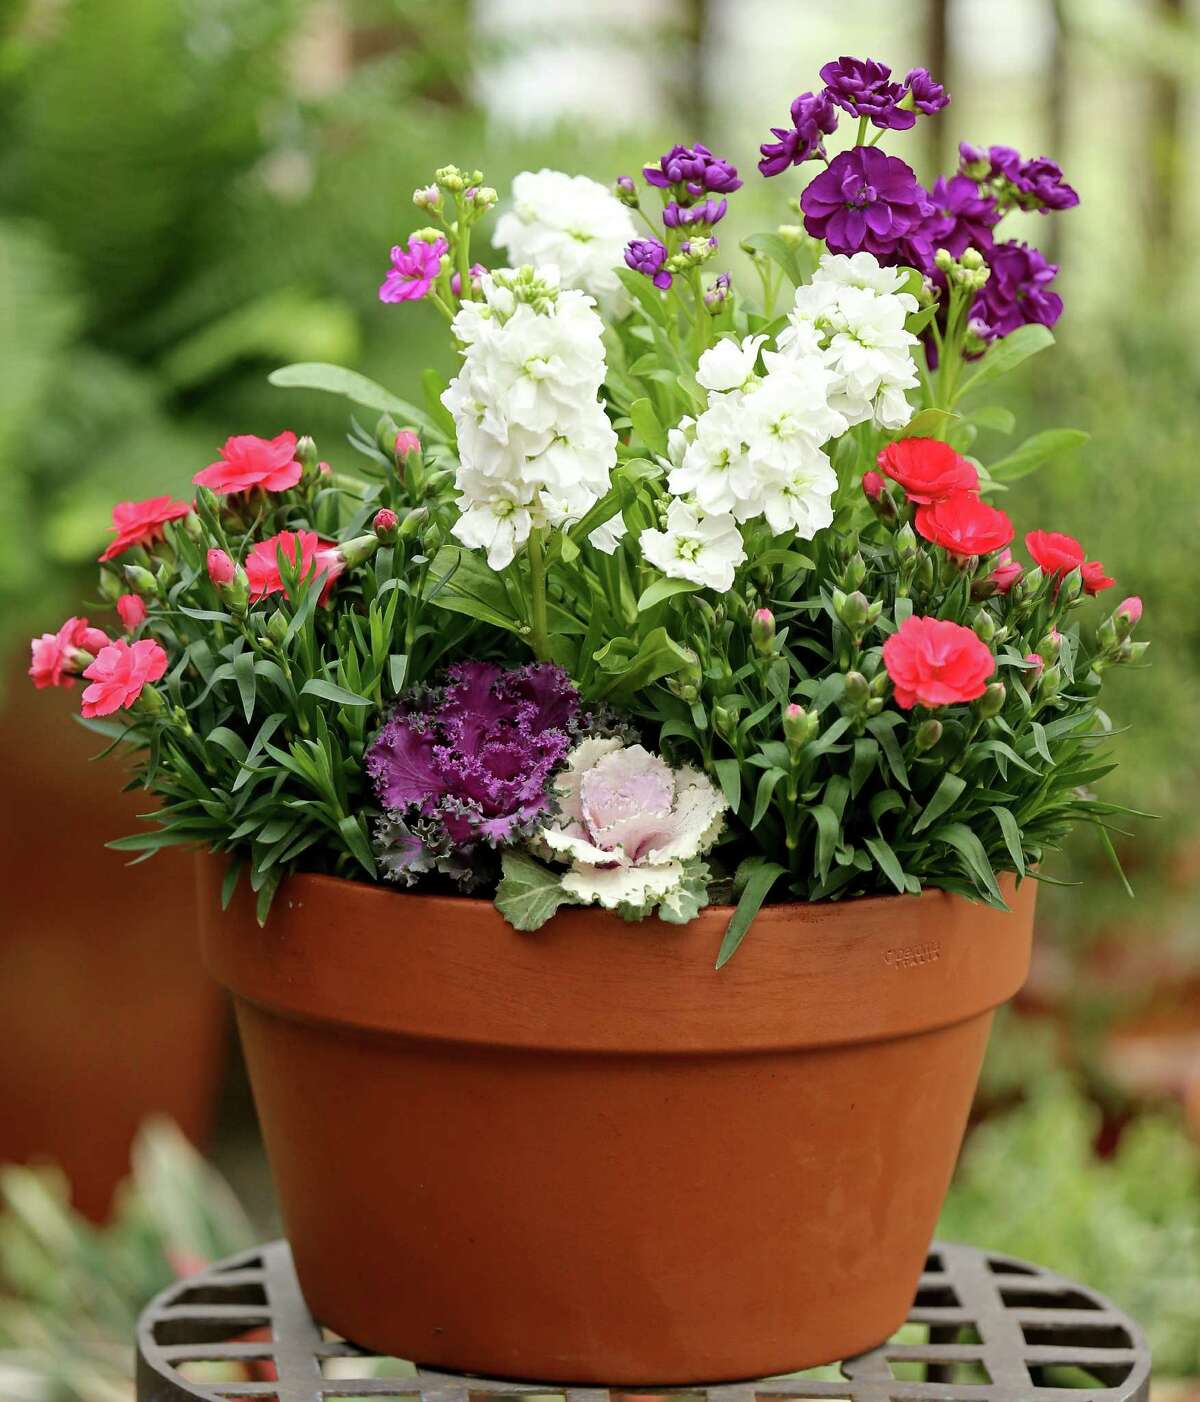 Pots Of Pleasure: Simple clay pots filled with ornamental kale, carnations and stock ensure Cupid's arrow hits its mark. From Shades Of Green.